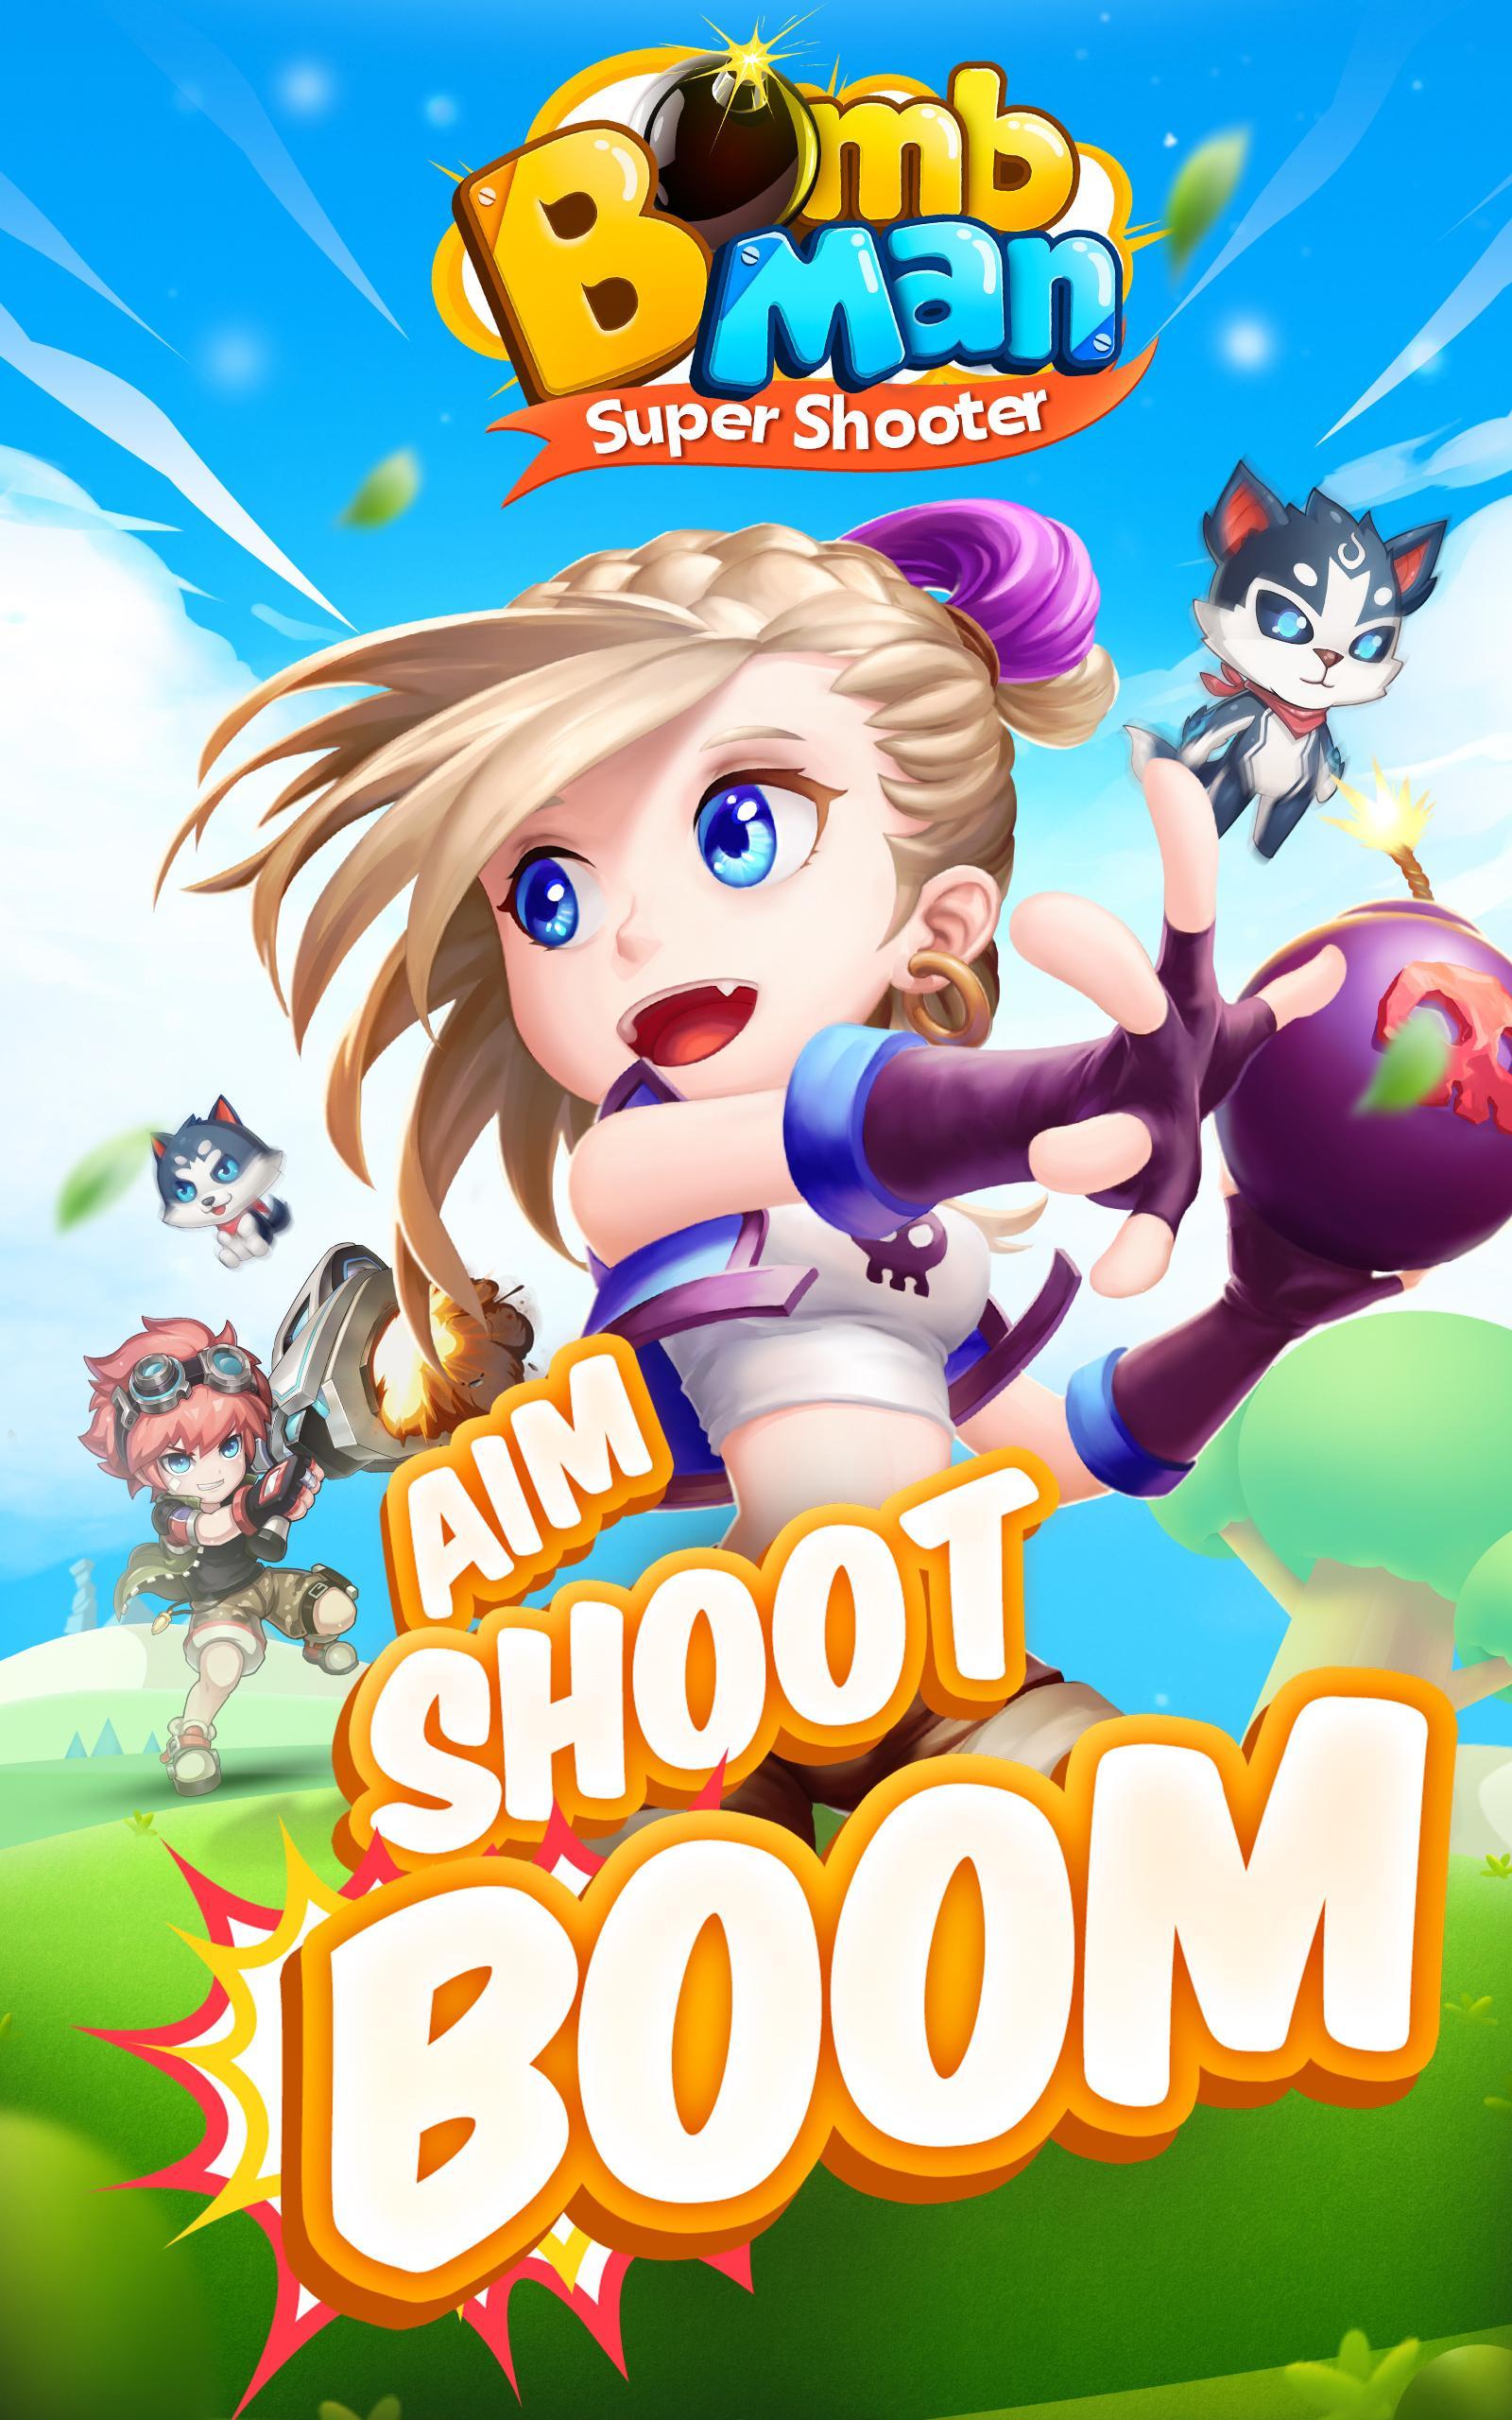 Bomb Girl for Android - APK Download - 